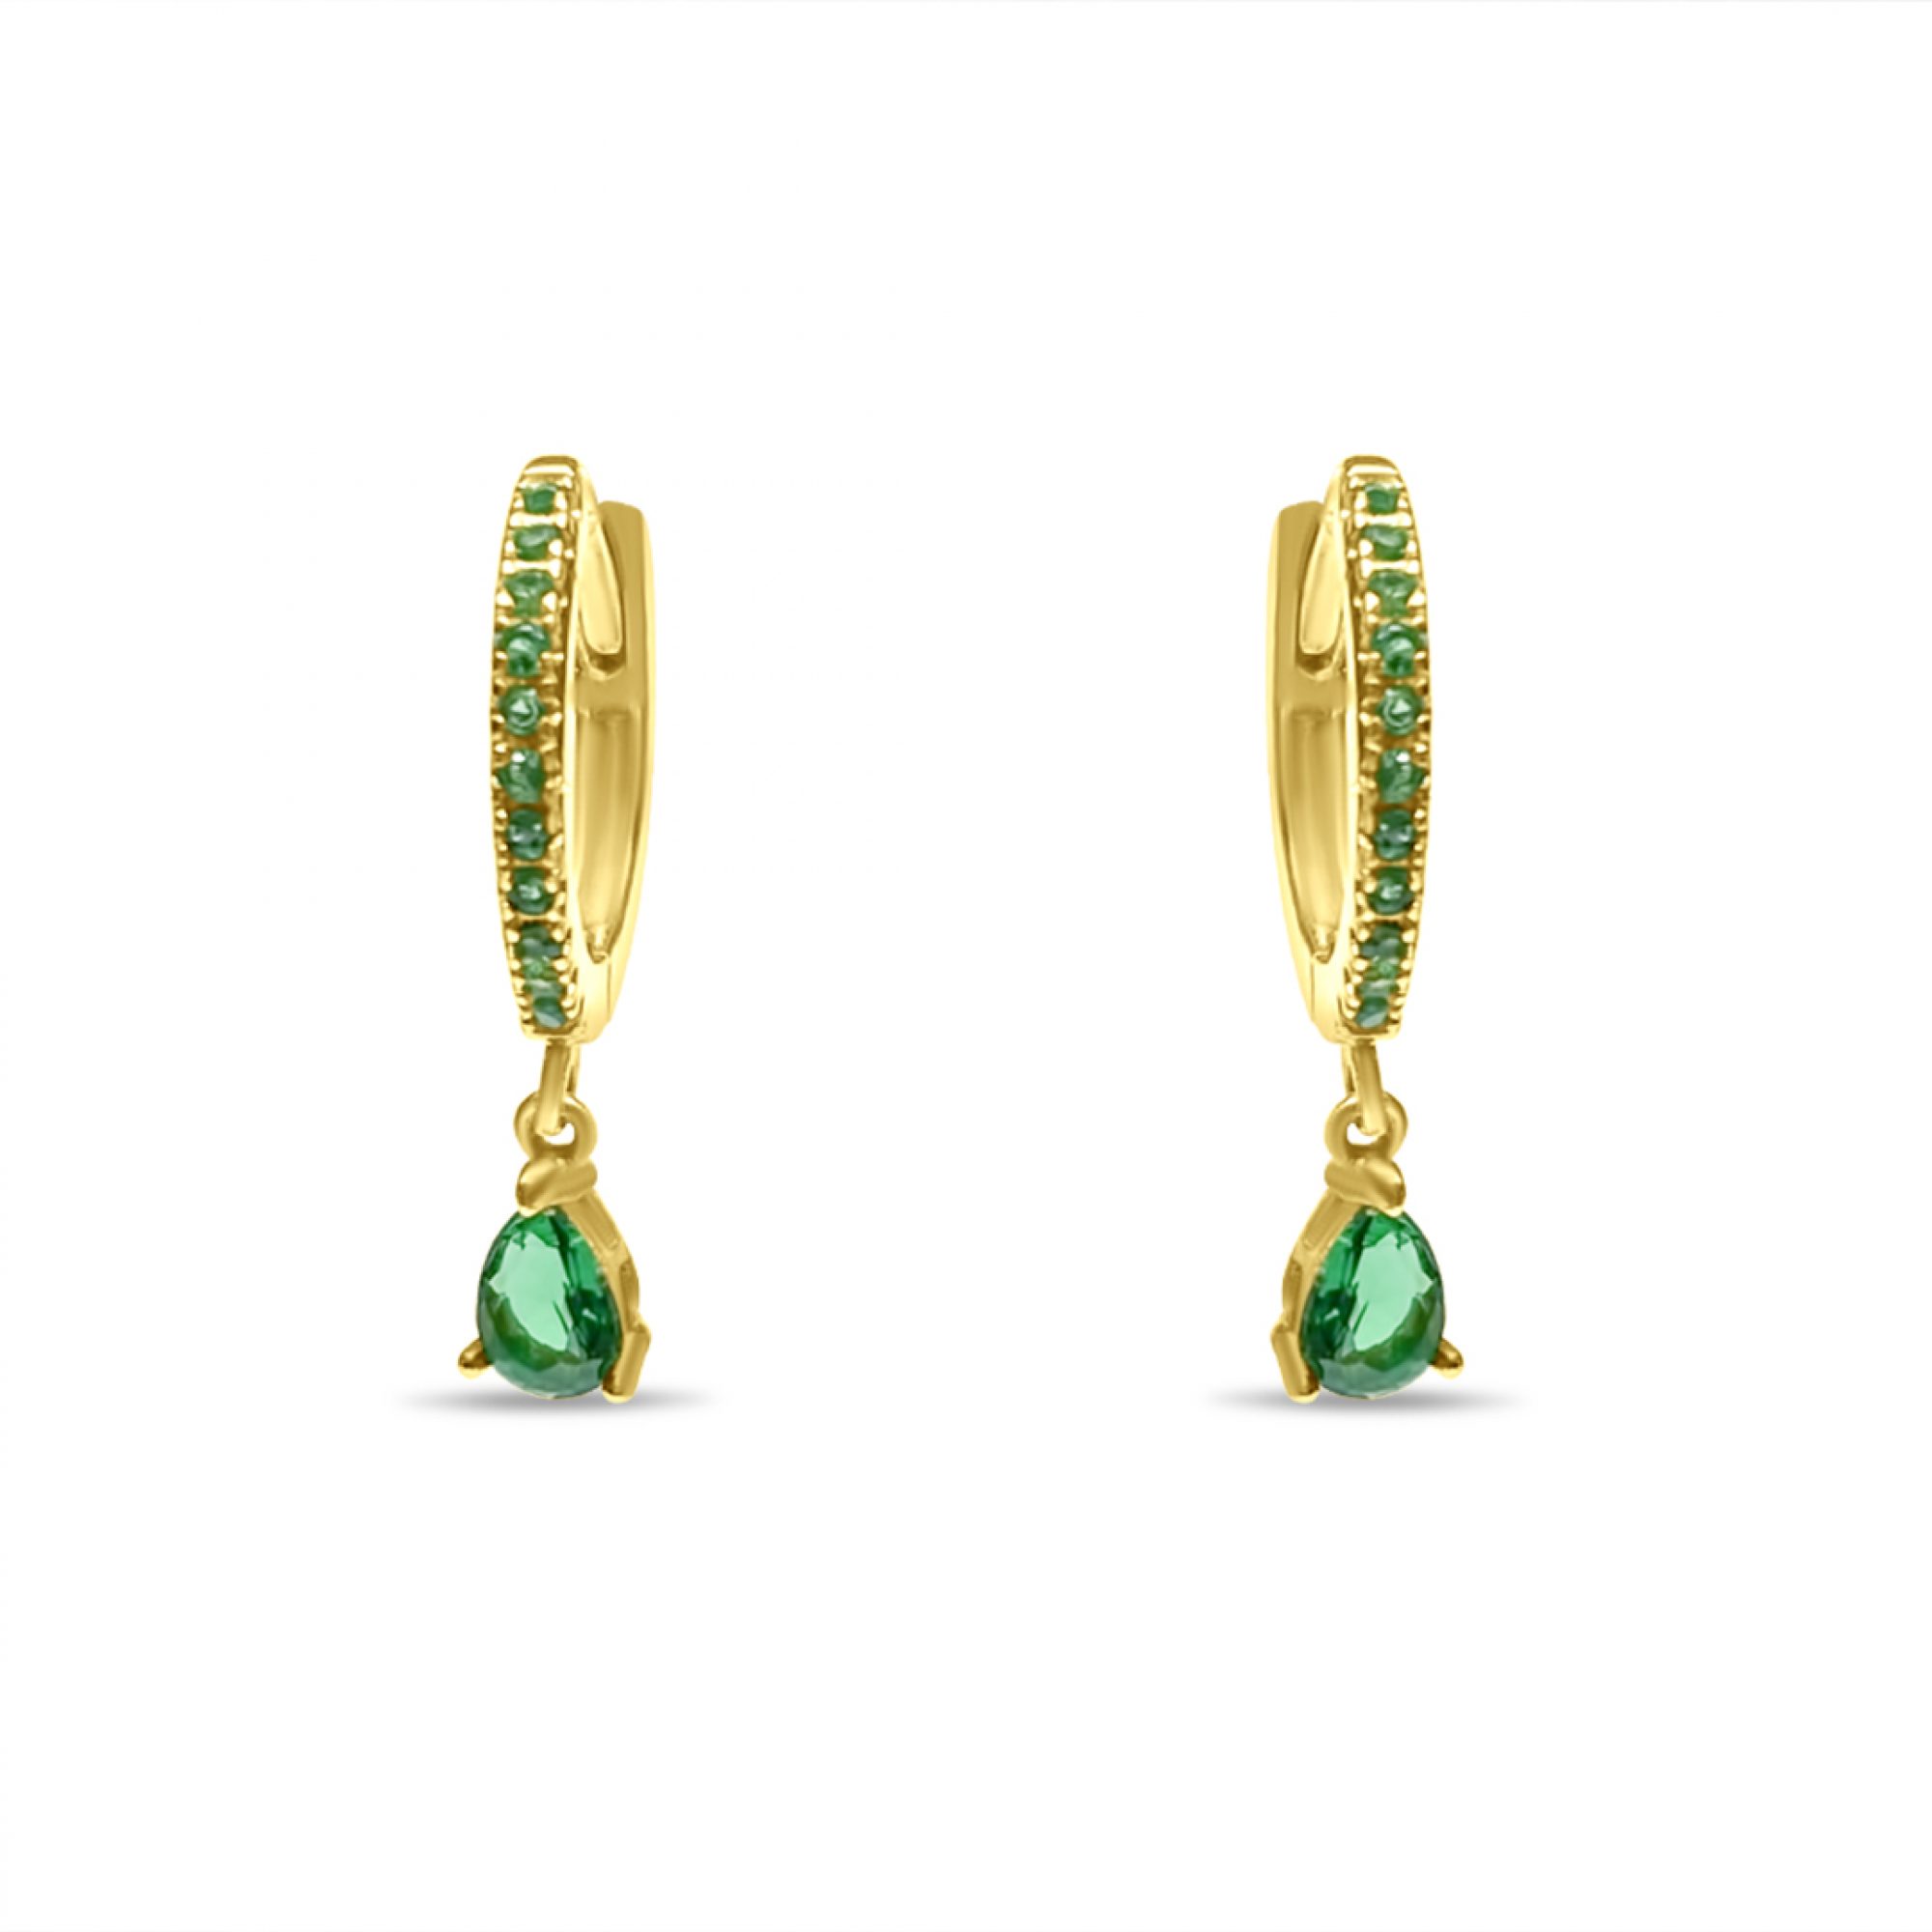 Gold plated earrings with emerald stones